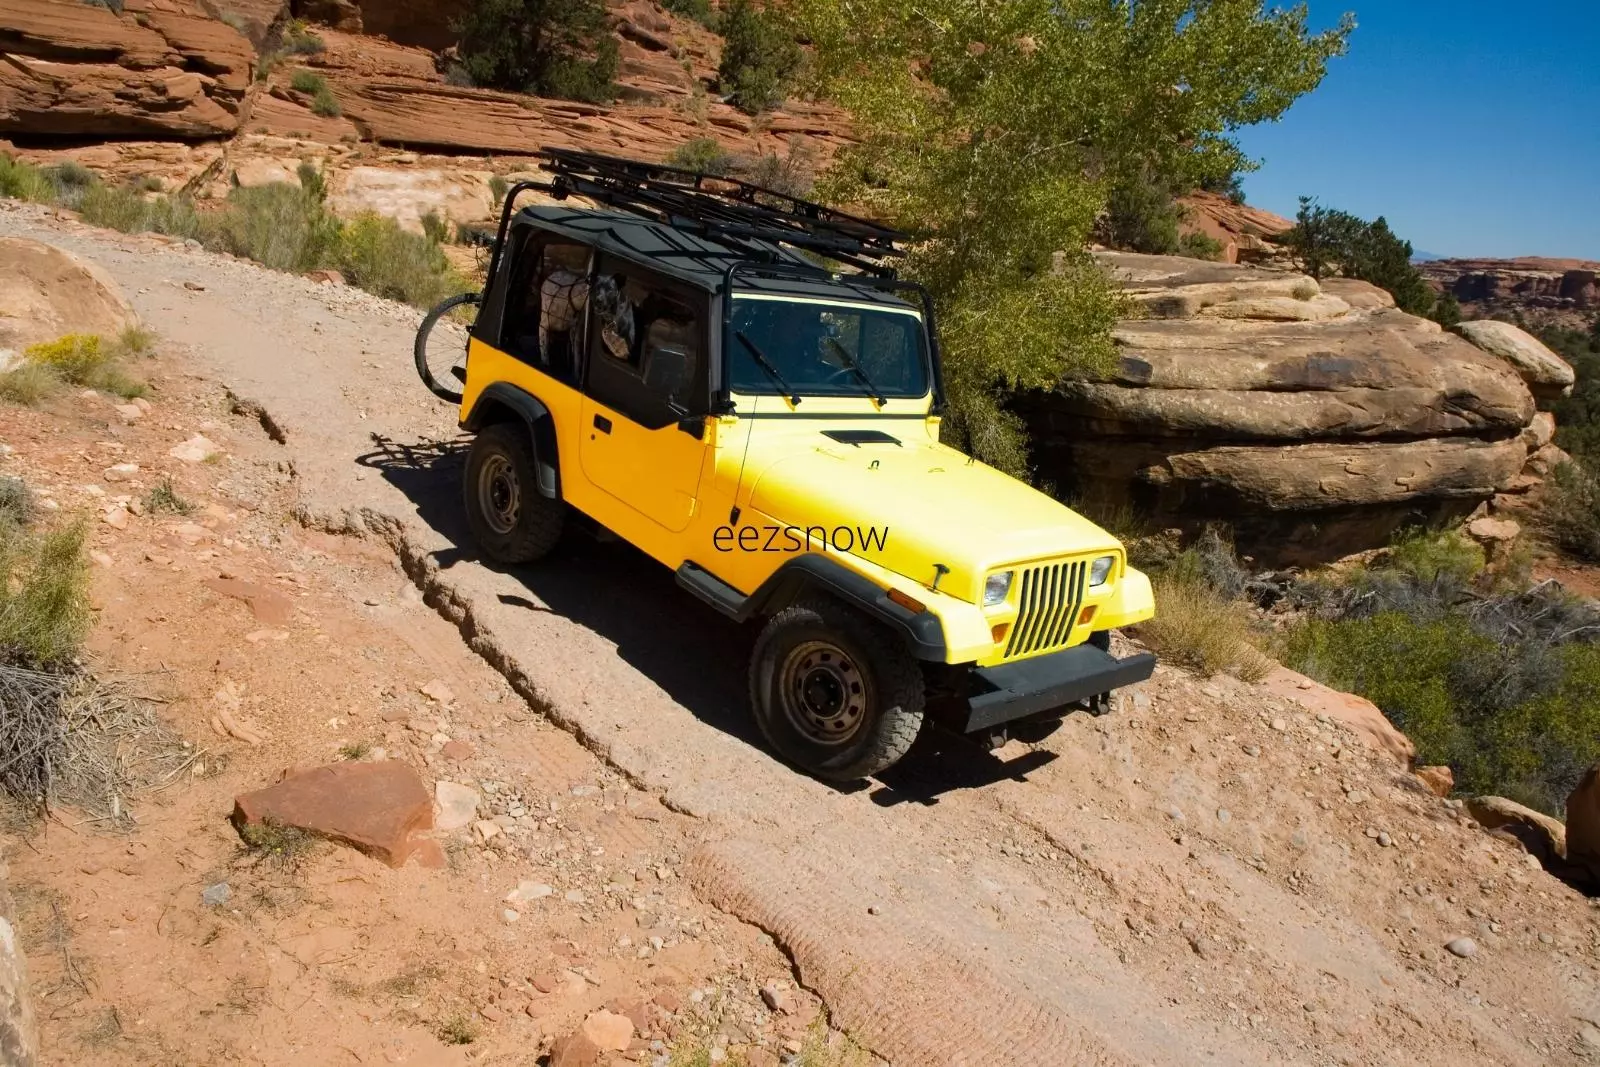 Most Challenging Off-Road Locations